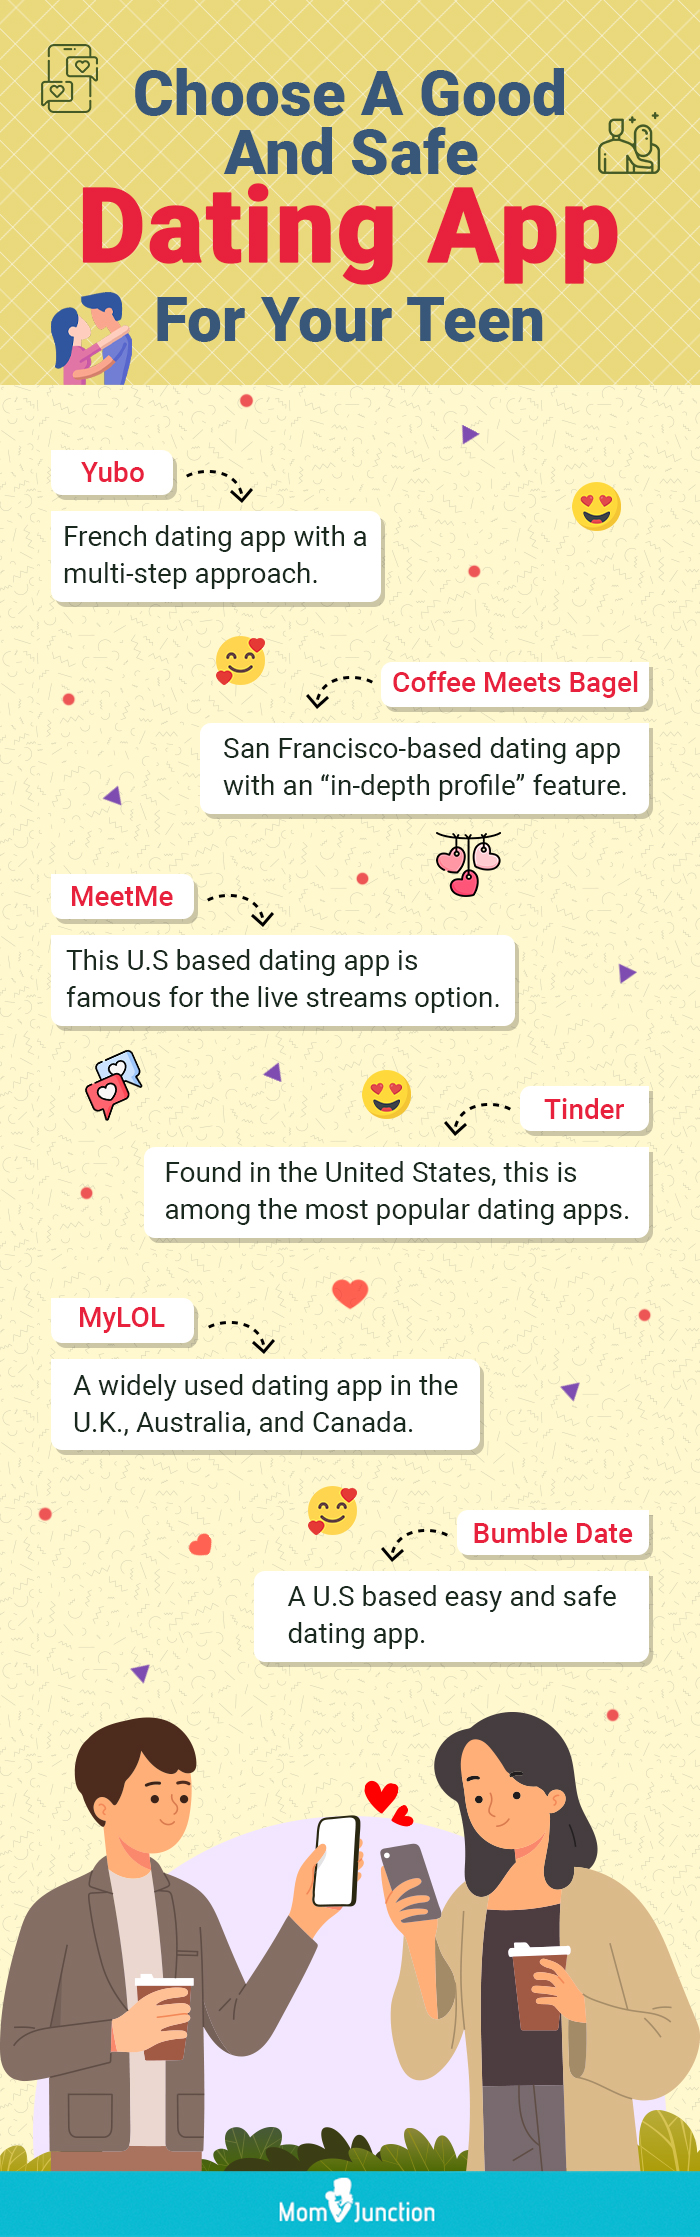 Online Girls Chat Meet Best Android app